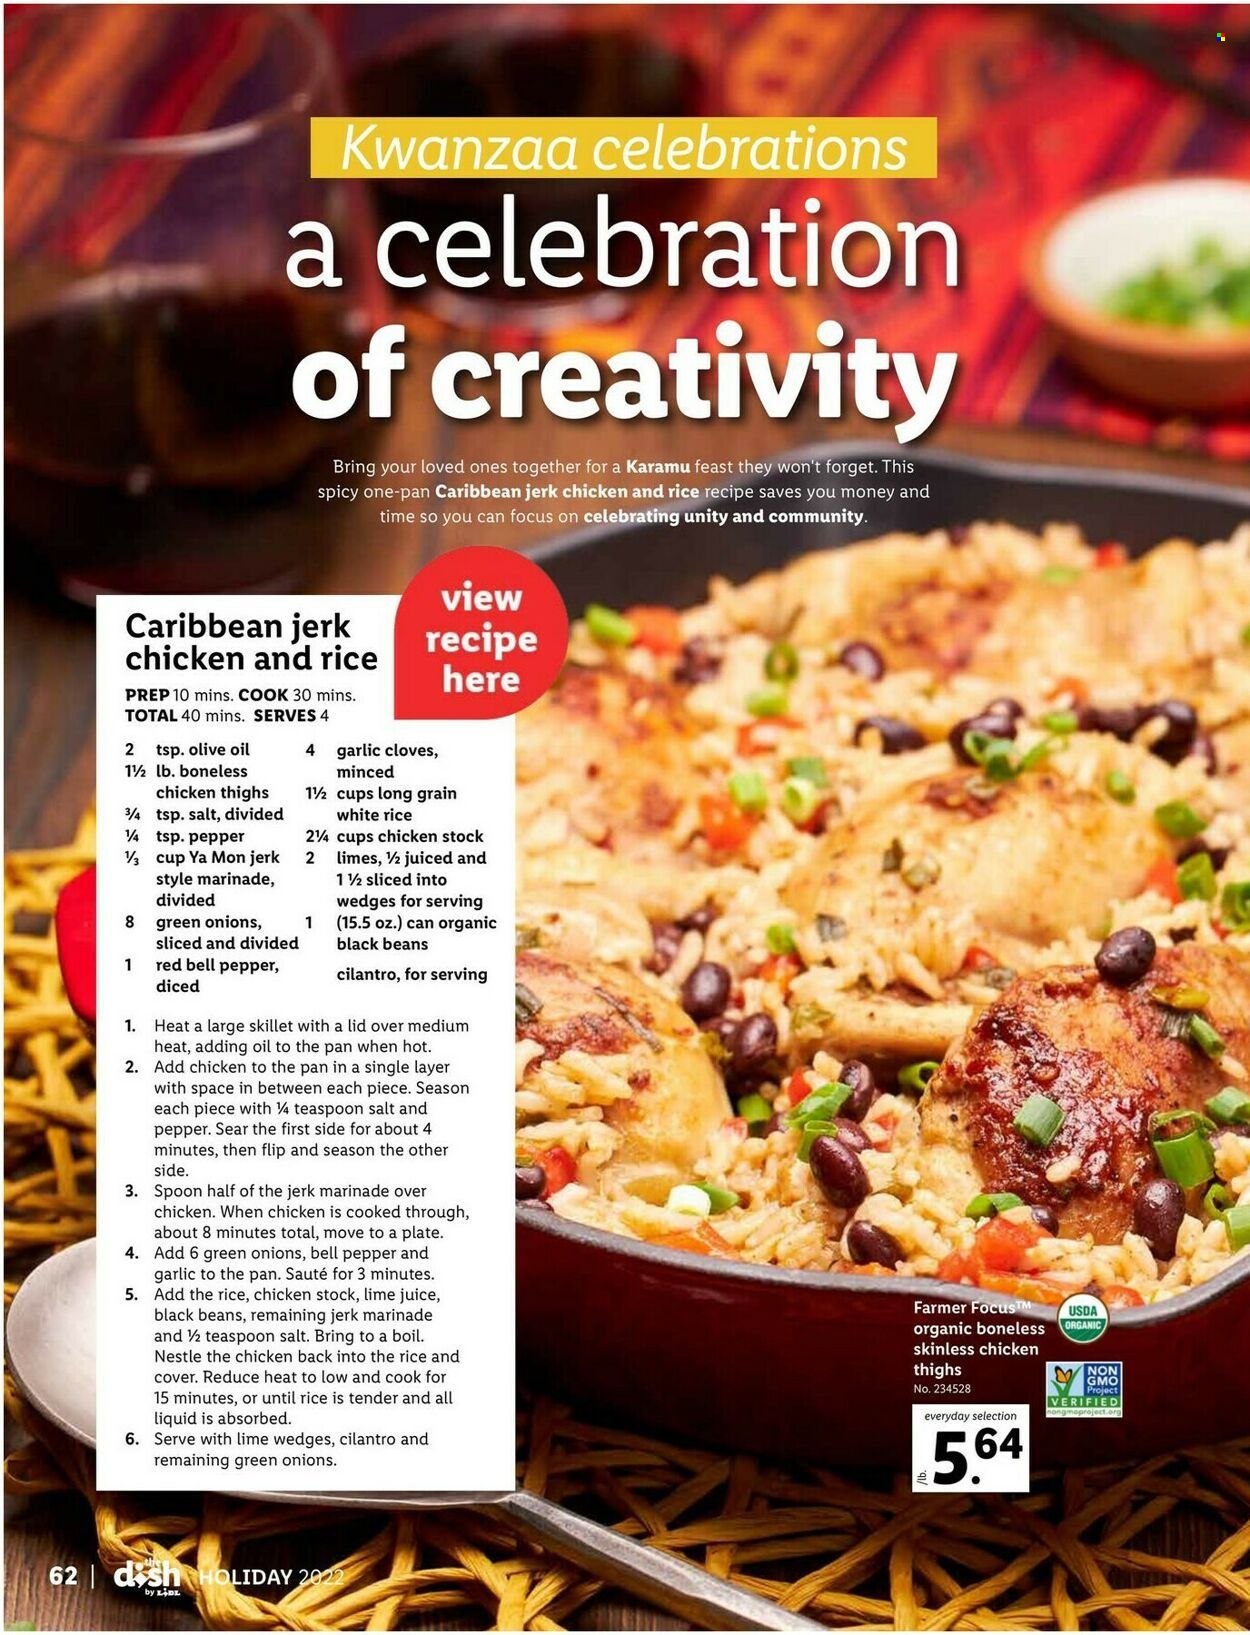 thumbnail - Lidl Flyer - 11/23/2022 - 12/27/2022 - Sales products - garlic, limes, Nestlé, Celebration, black beans, white rice, cilantro, pepper, cloves, marinade, olive oil, oil, chicken thighs, lid, spoon, pan, teaspoon. Page 64.